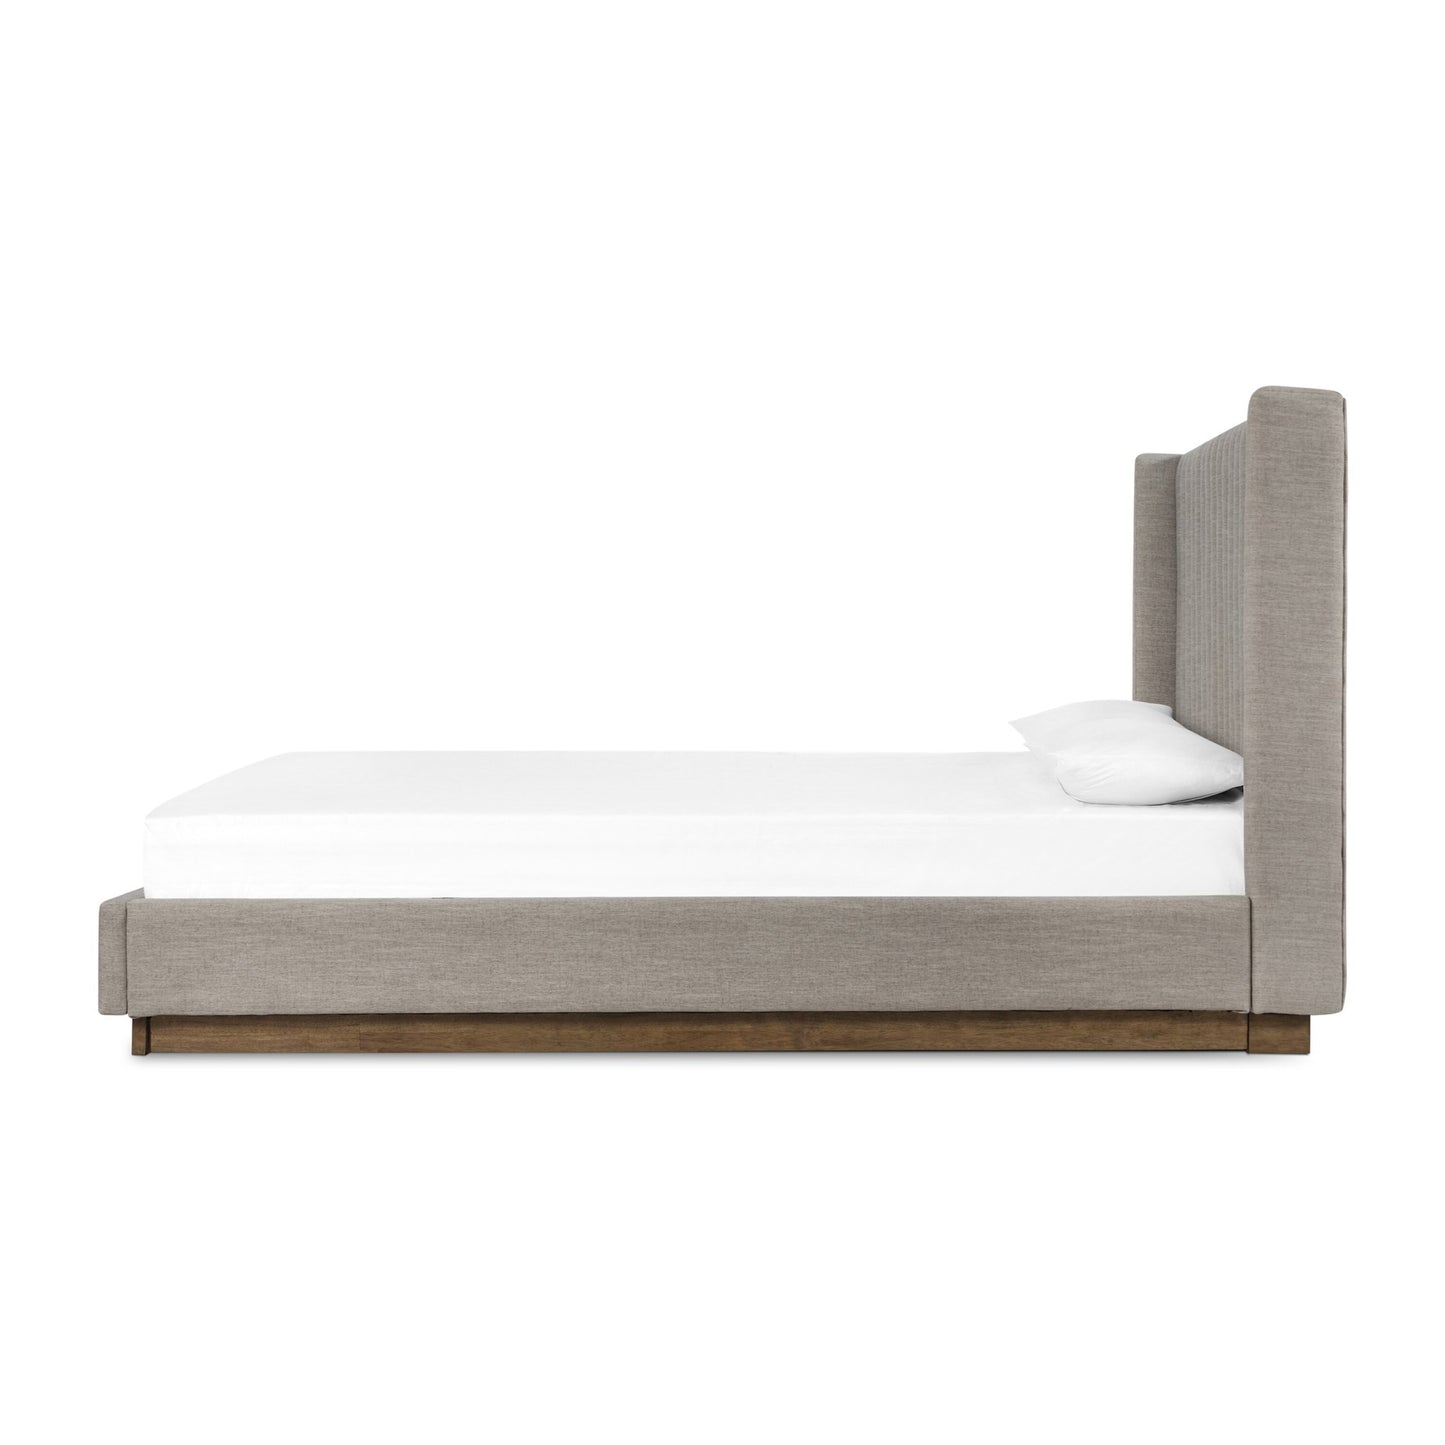 Montgomery bed: savile flannel-weathered sepia-king